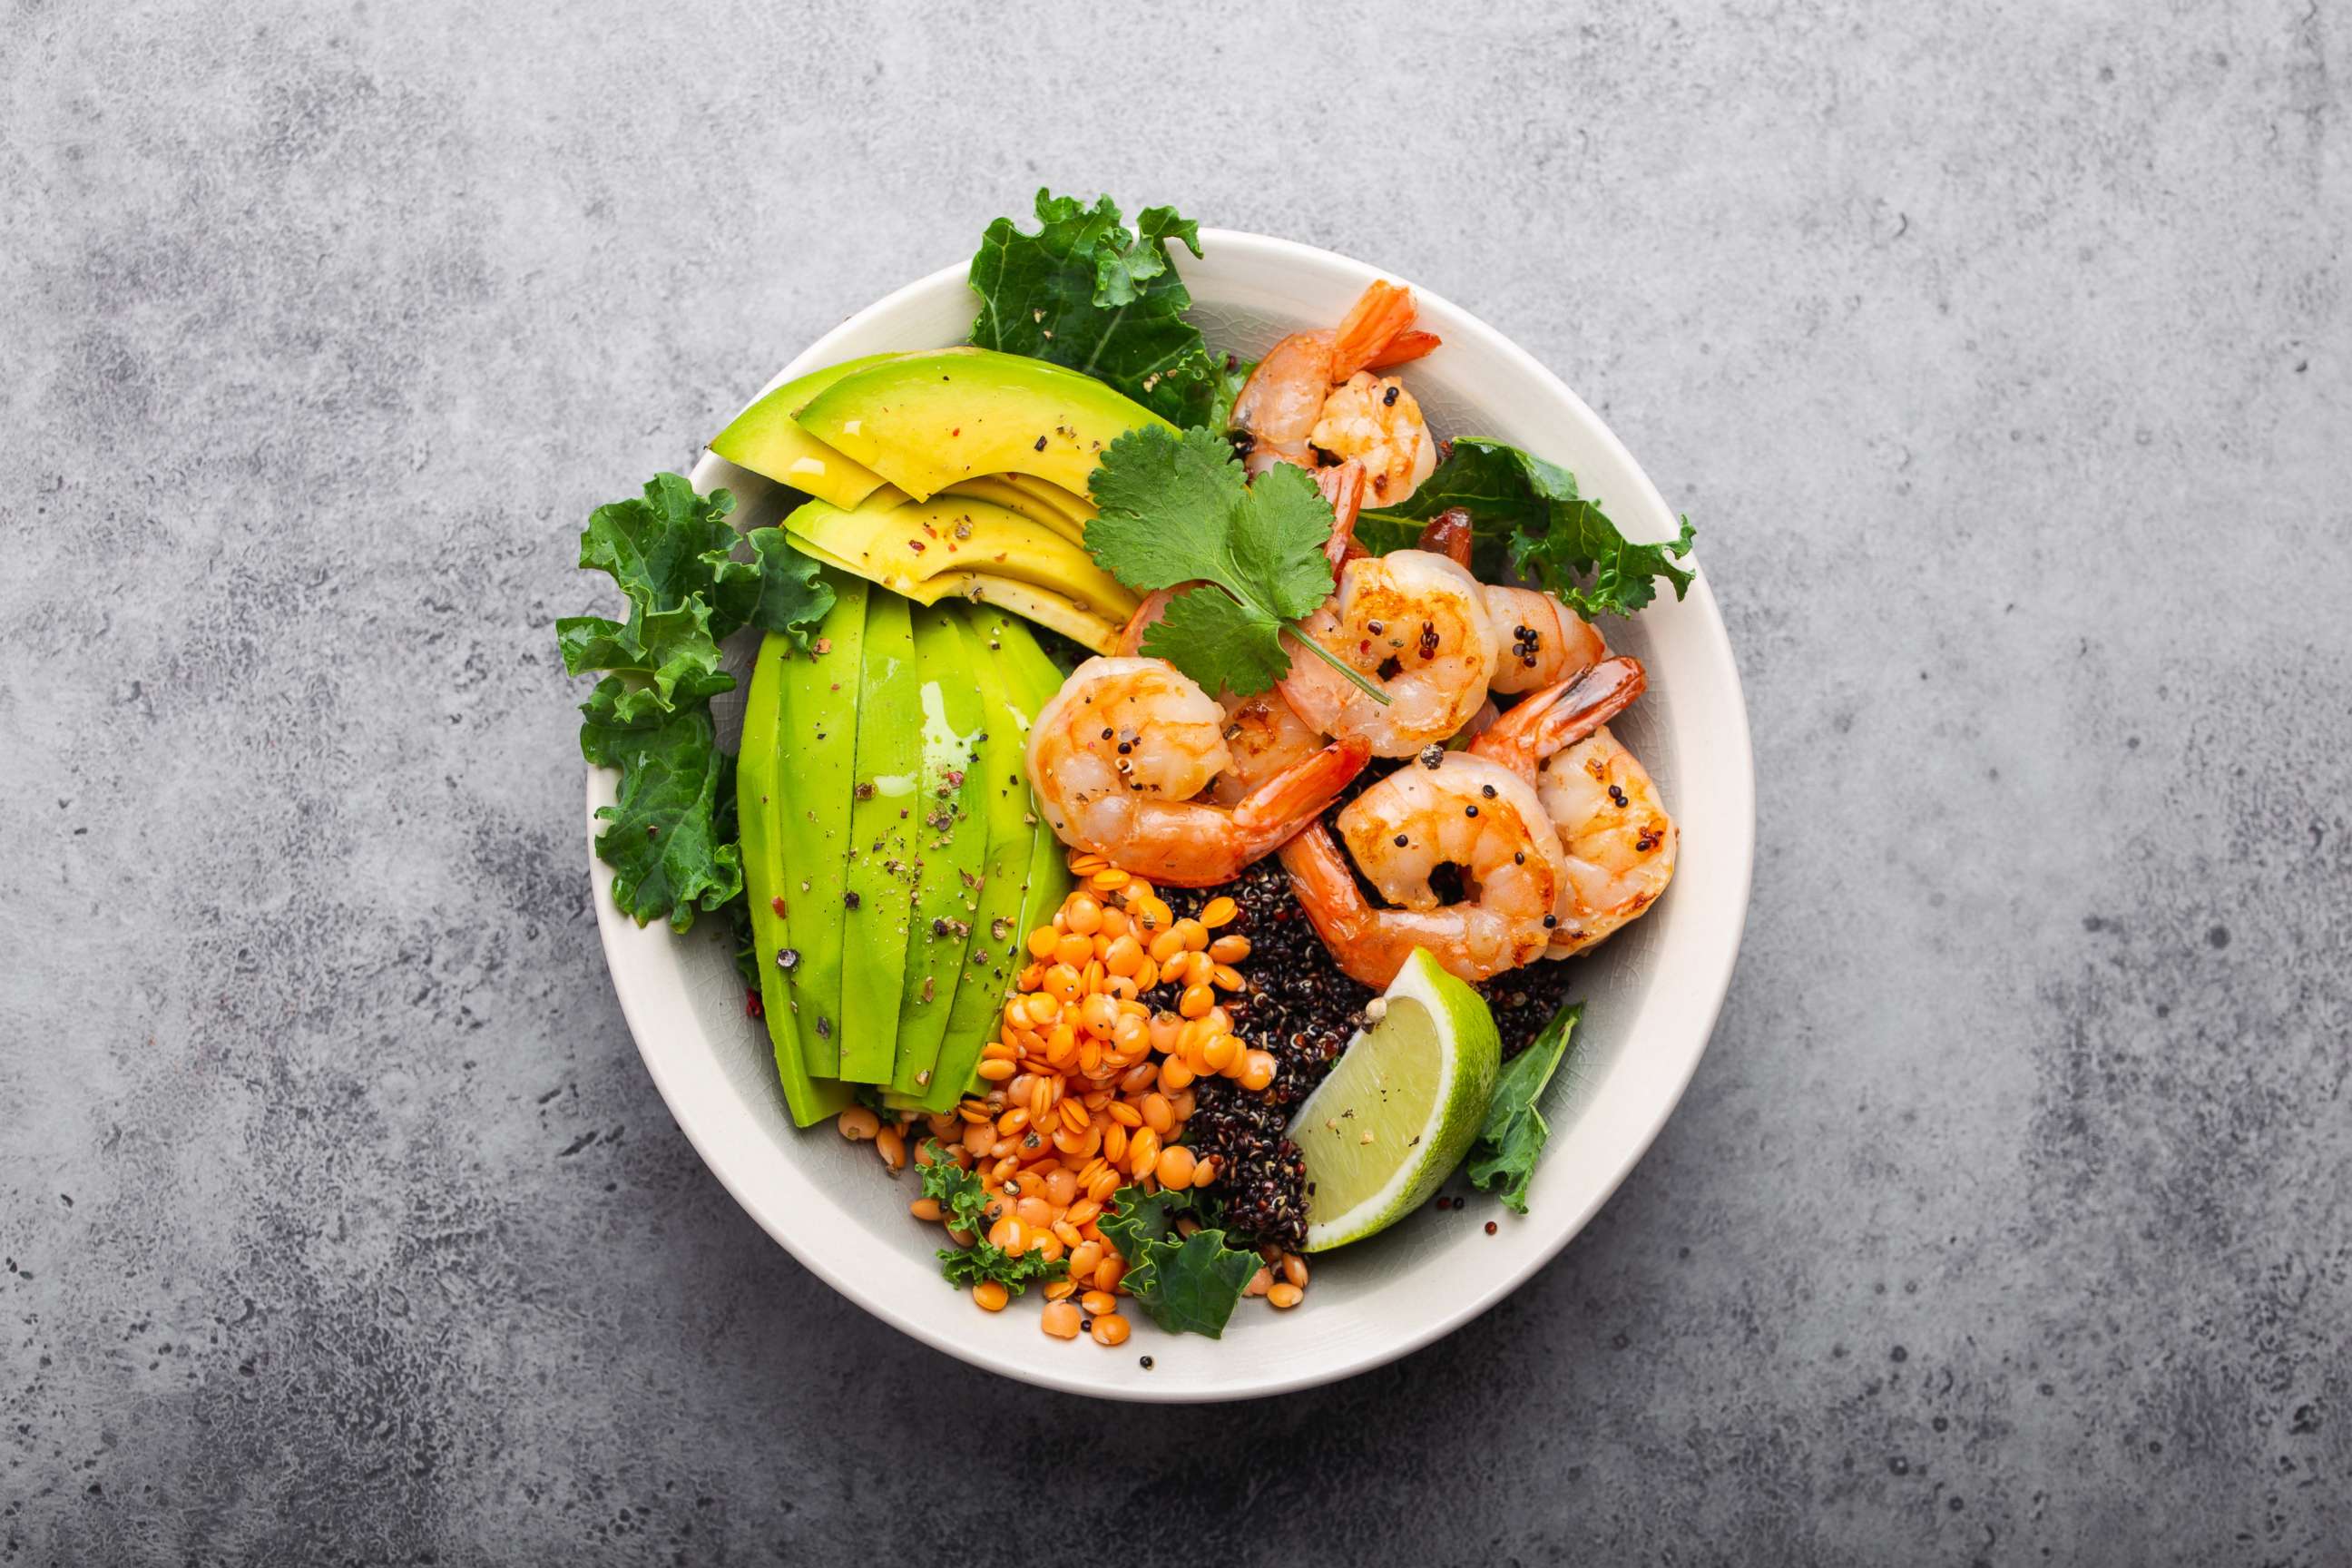 PHOTO: Top view of salad bowl with shrimp, avocado, fresh kale, quinoa, red lentils, lime and olive oil.